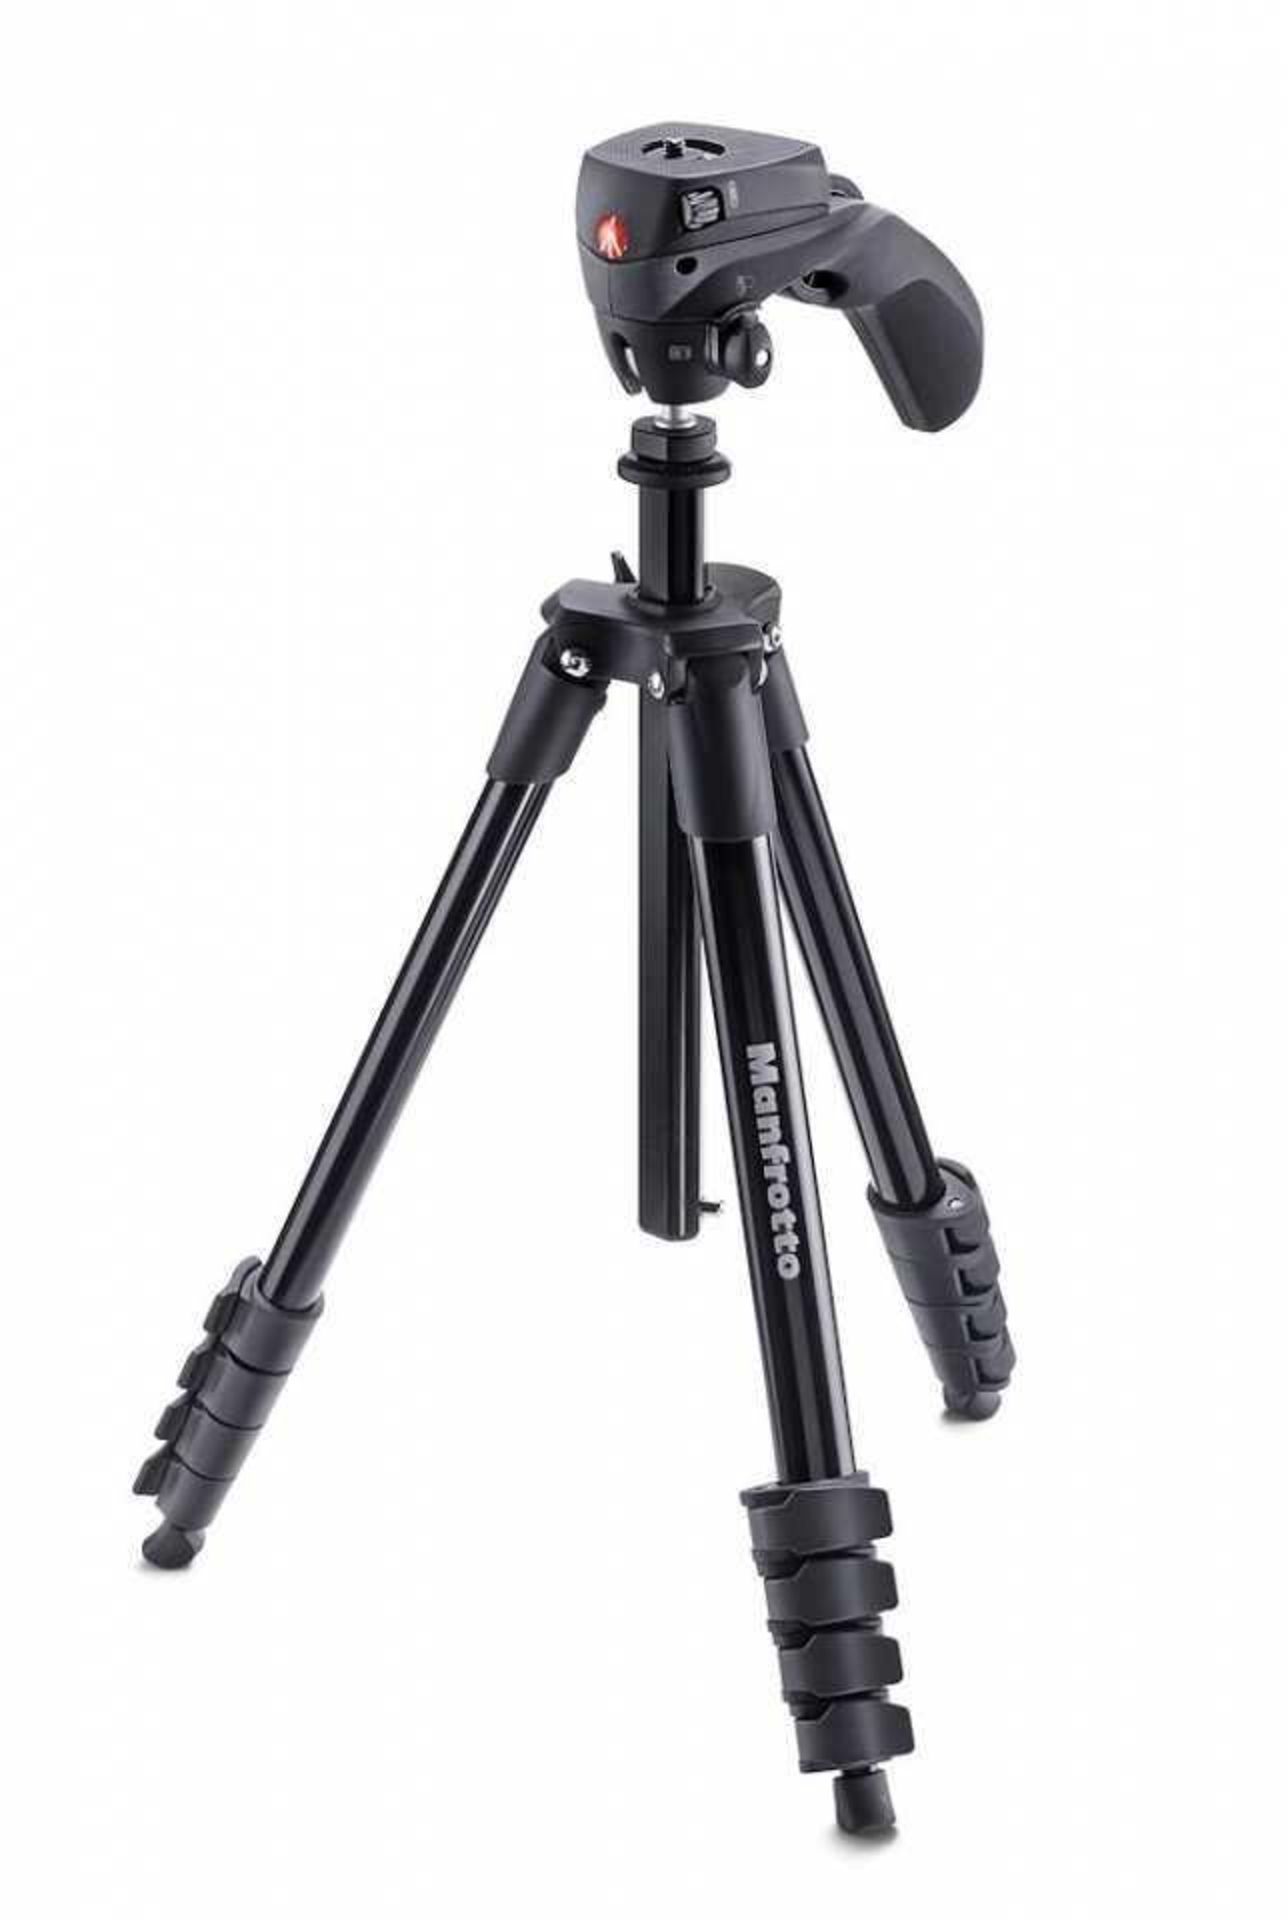 RRP £120 Combined Lot To Contain 1 Boxed Joby Griptight Pro Telepod & 1 Manfrotto Compact Action Tri